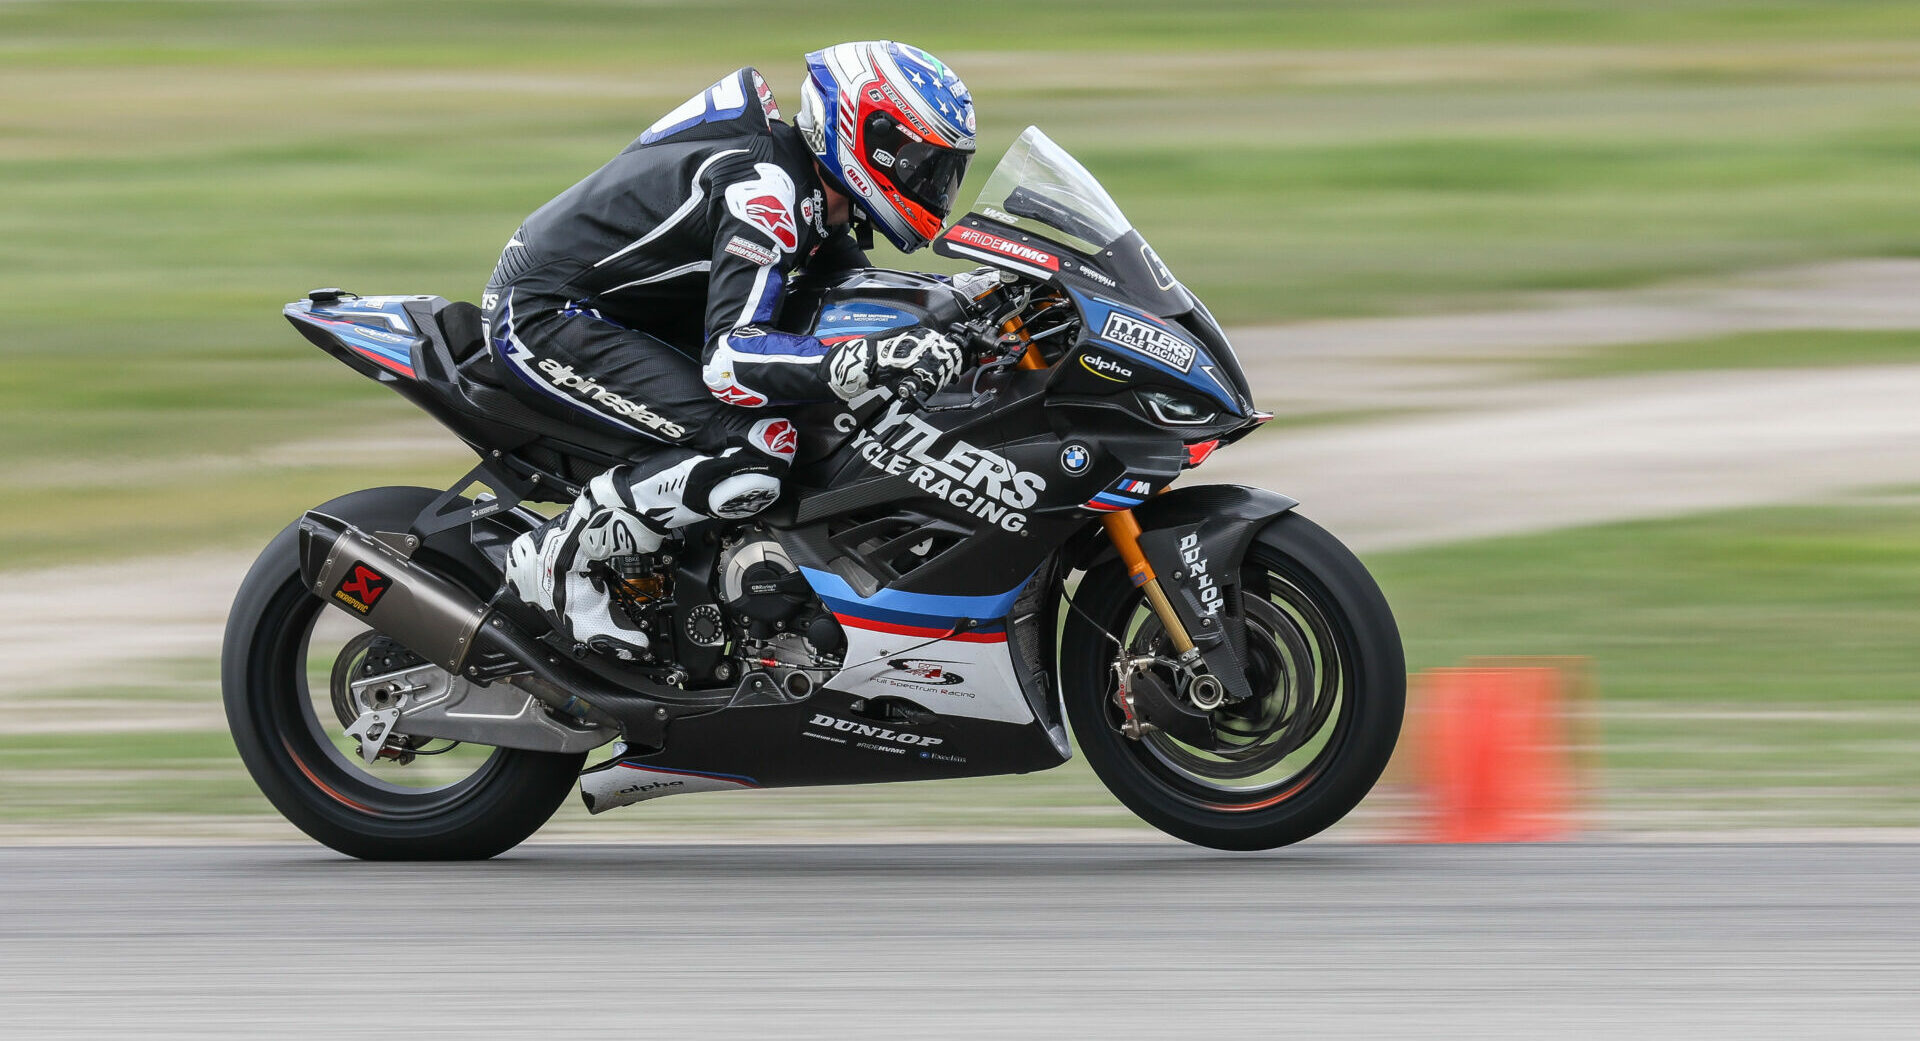 Cameron Beaubier (6), as seen during pre-season testing at Buttonwillow. Photo by Brian J. Nelson.